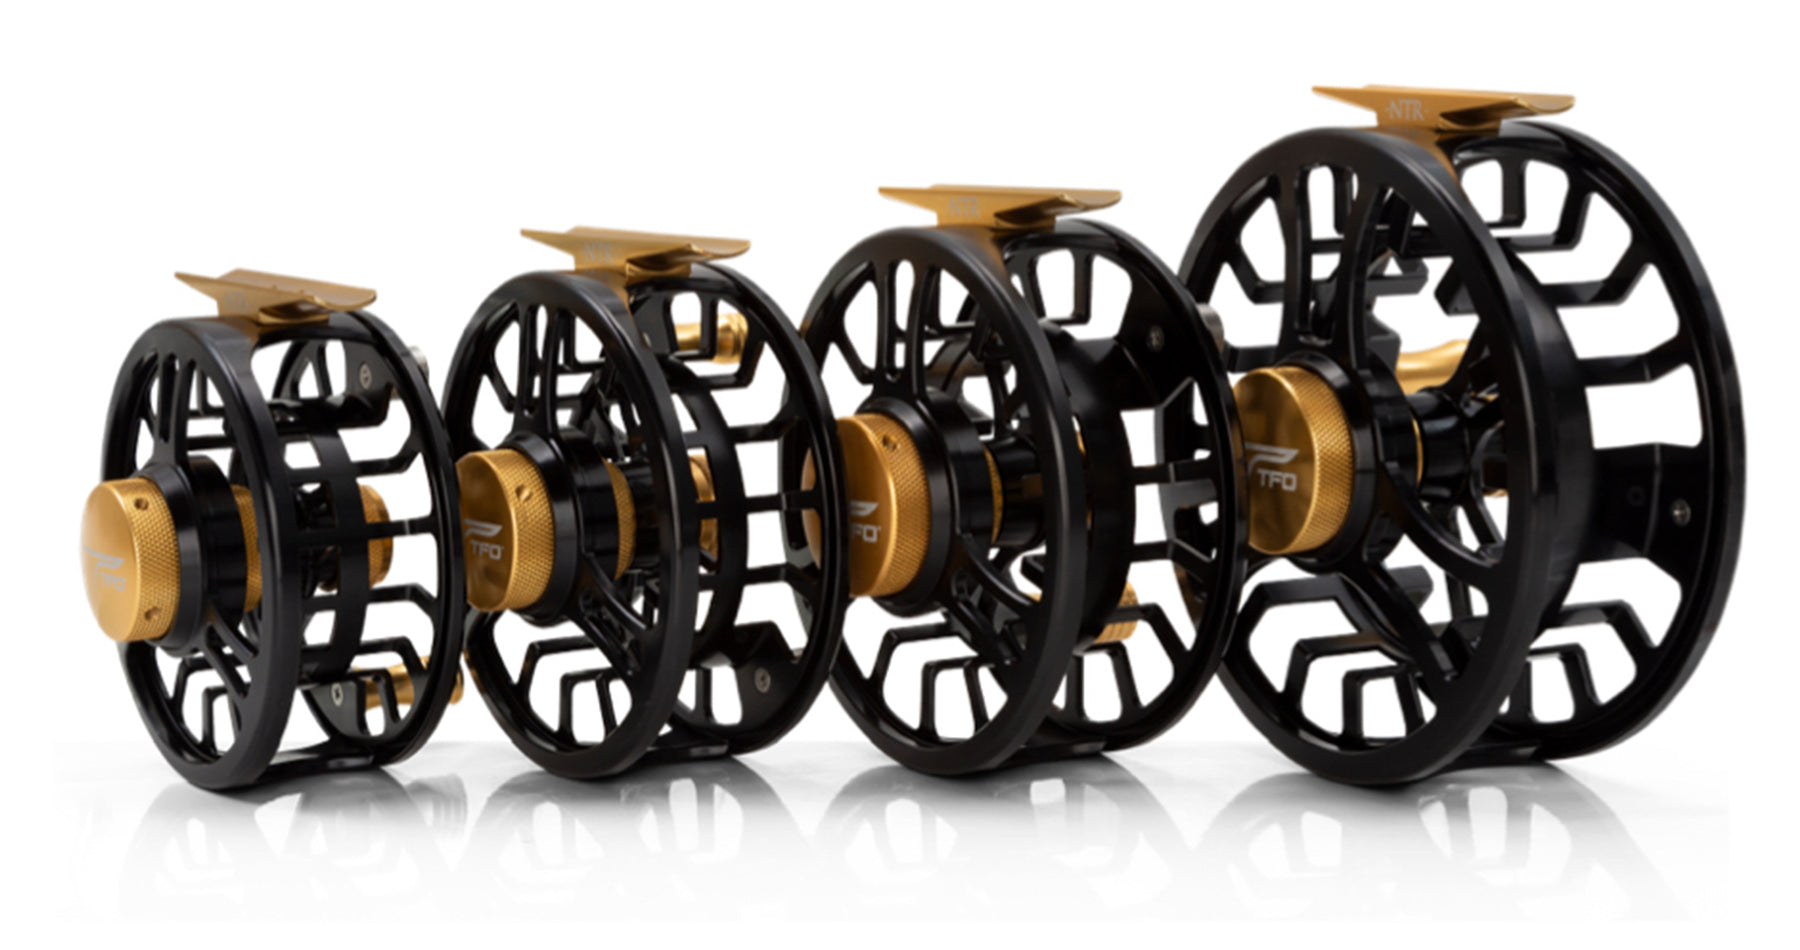 TFO BVK SD Fly Reel Spools (Now On Clearance 25% Off) 